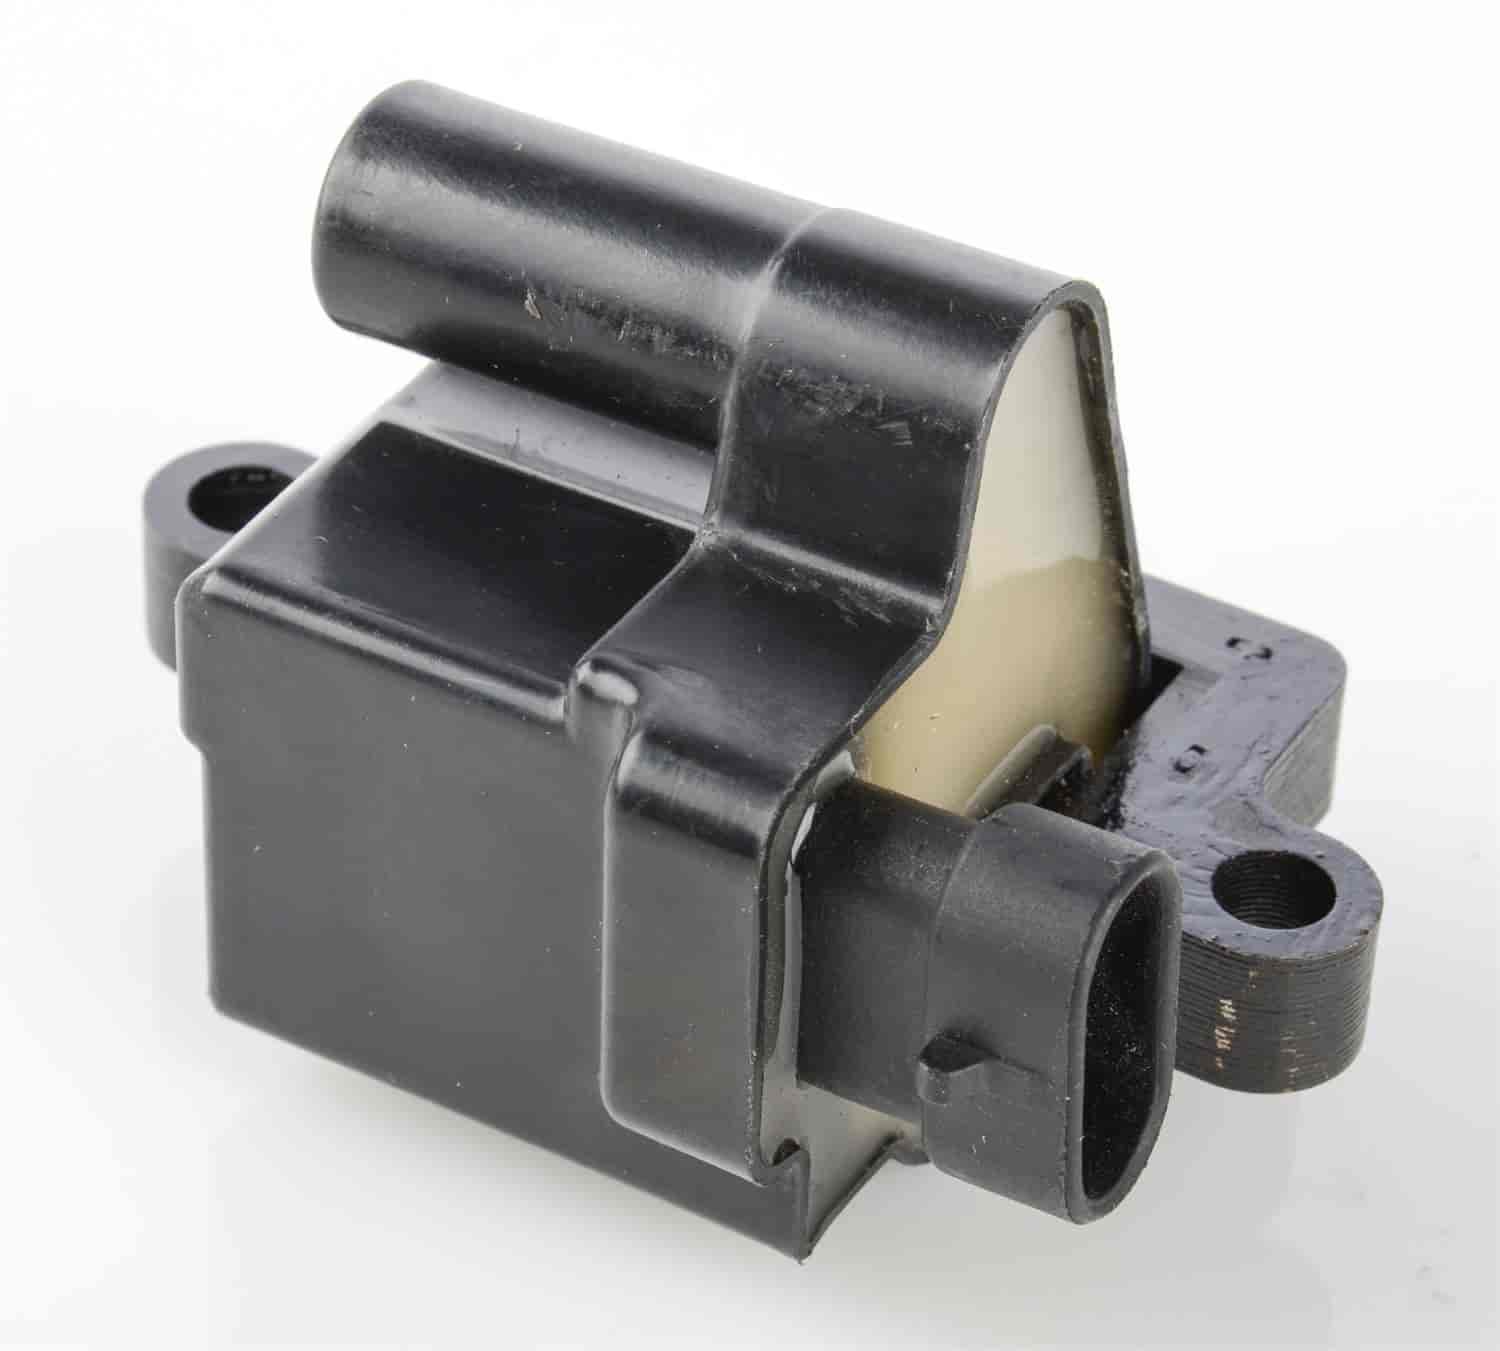 GM LS Ignition Coil for 1999-2007 4.8L/5.3L/6.0L, 2001-2009 8.1L Truck Engines [Square type]